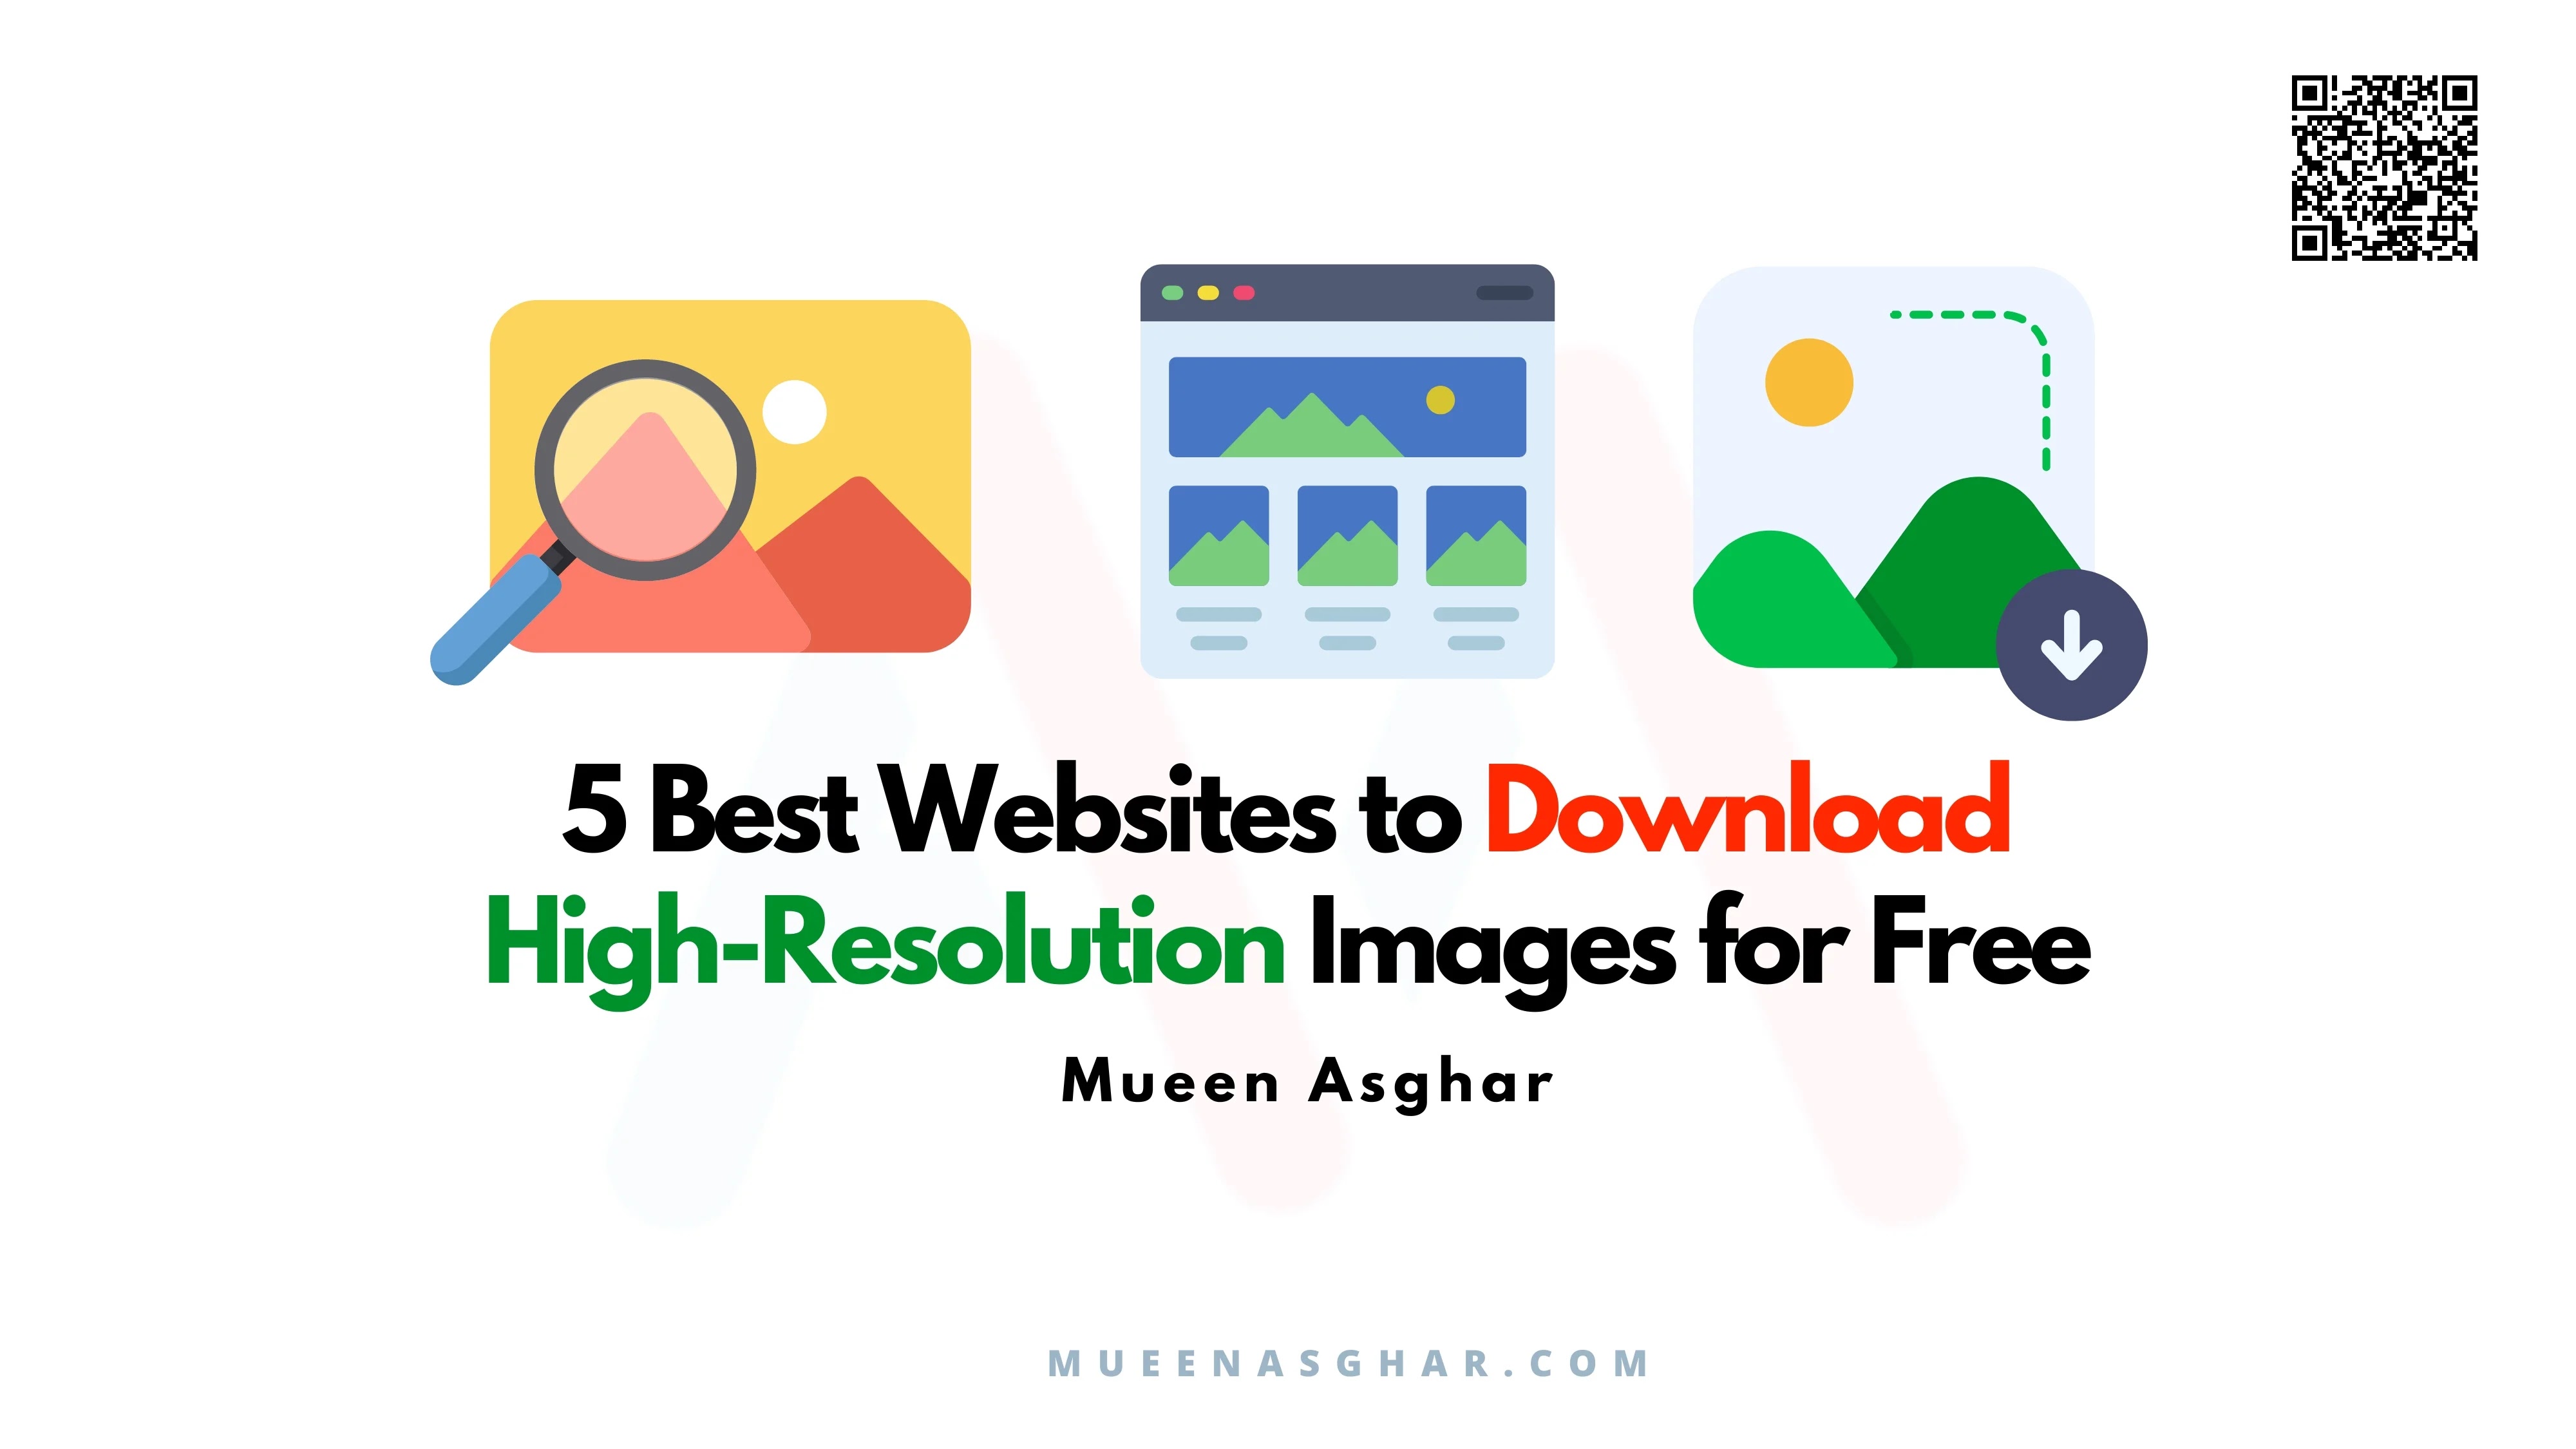 5 Best Websites to Download High-Resolution Images for Free